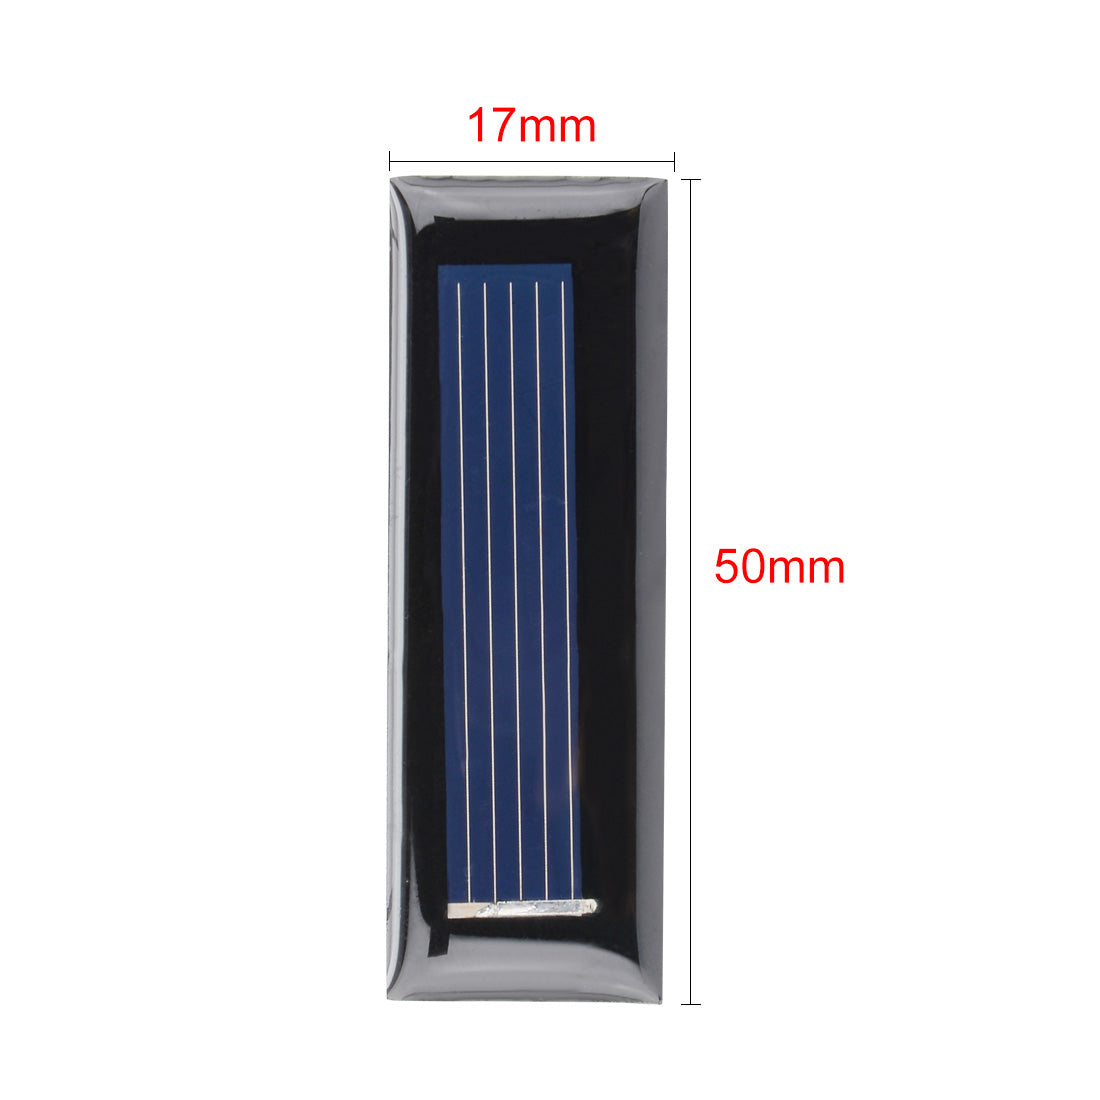 uxcell Uxcell 5Pcs 0.5V 80mA Poly Mini Solar Cell Panel Module DIY for Phone Light Toys Charger 50mm x 17mm